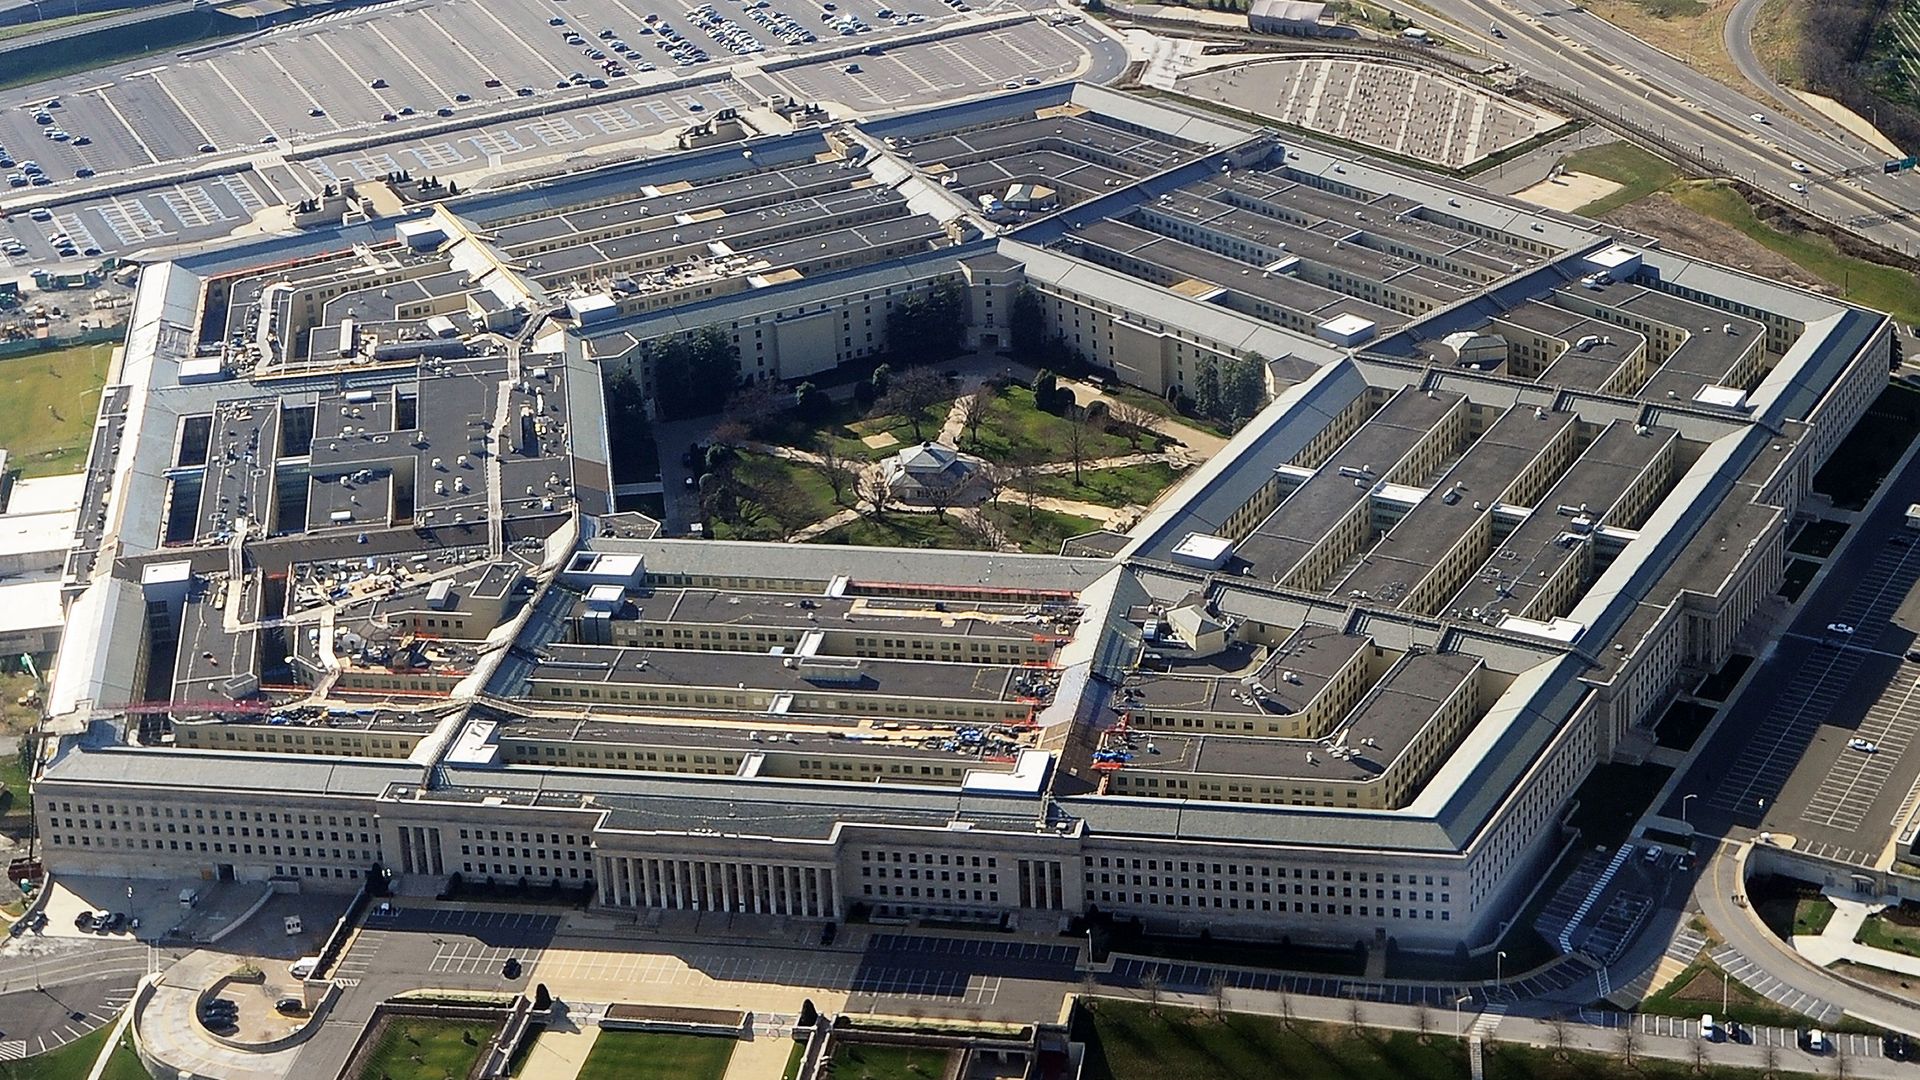 The U.S. Defense Department failed to score a clean financial audit for the sixth year, despite claiming progress in correcting deficiencies.